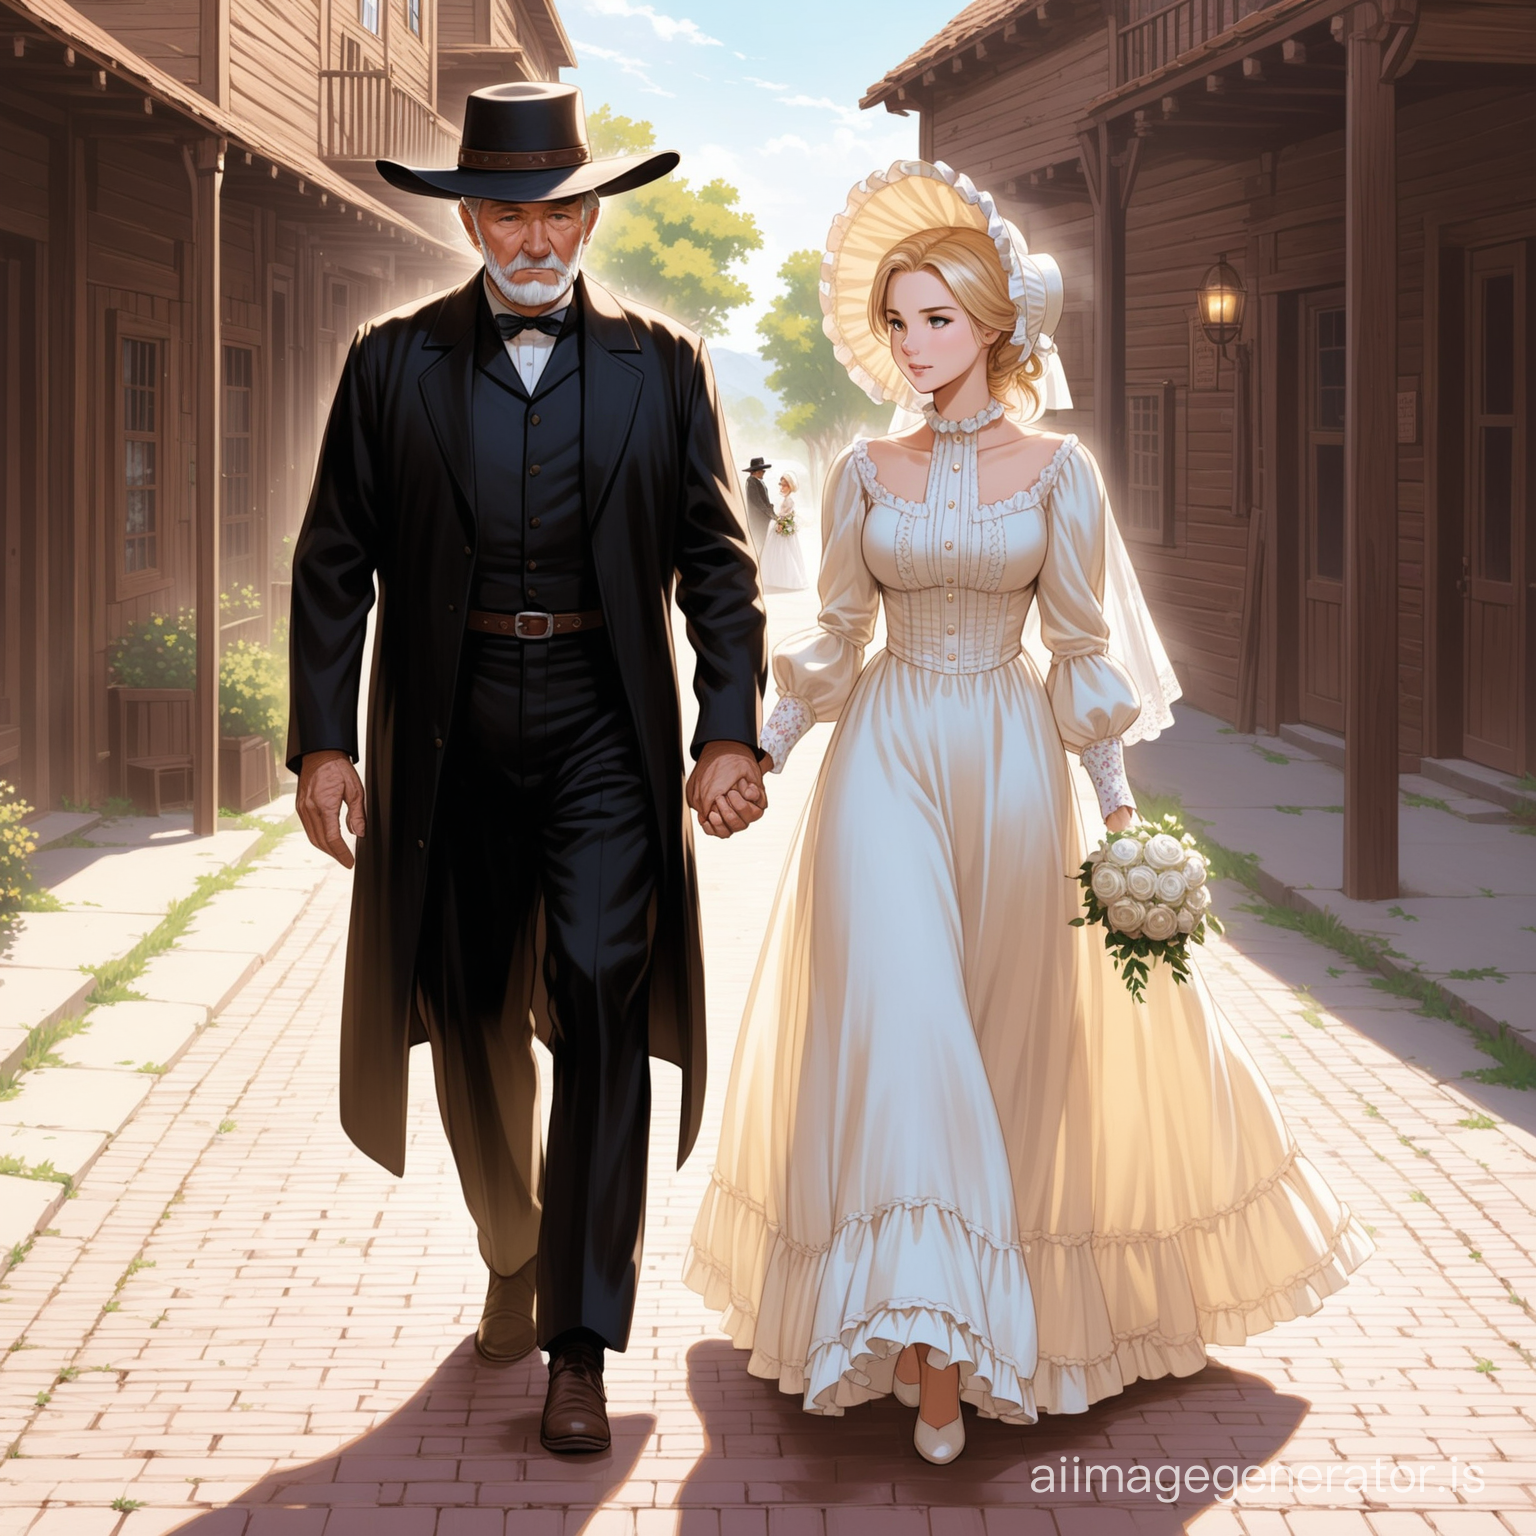 Susan Storm from the FF4 dressed as an old west farmer's wife wearing a calicot floor-length loose billowing old west poofy modest dress with a frilly bonnet walking on a old west era sidewalk with an old man dressed into a black suit who seems to be her newlywed husband